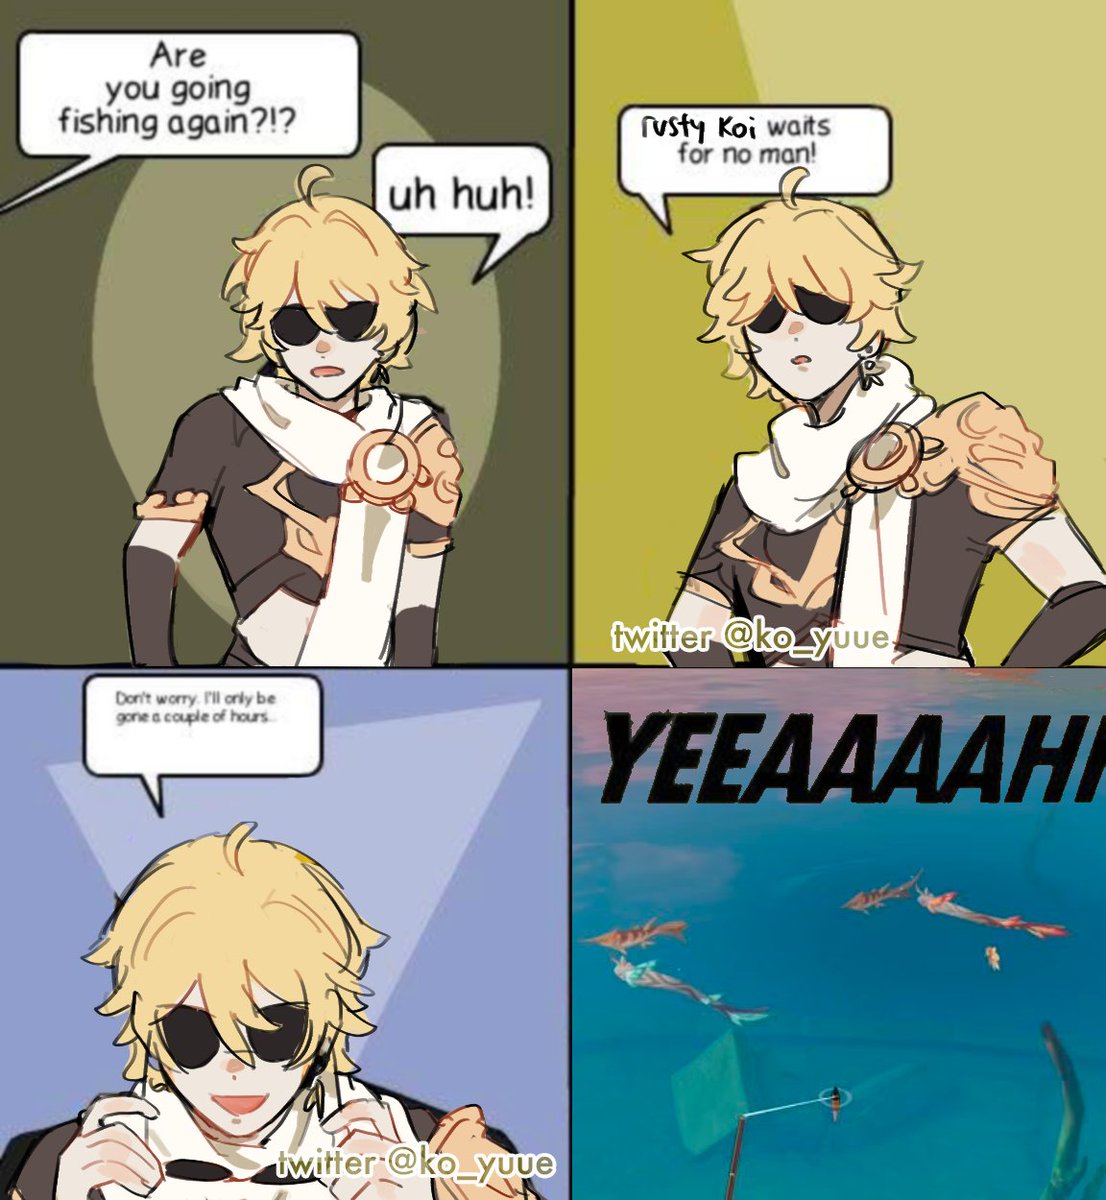 #GenshinImpact #原神 
fishing memes to commemorate fishing event (please give me the catch alrdy) 